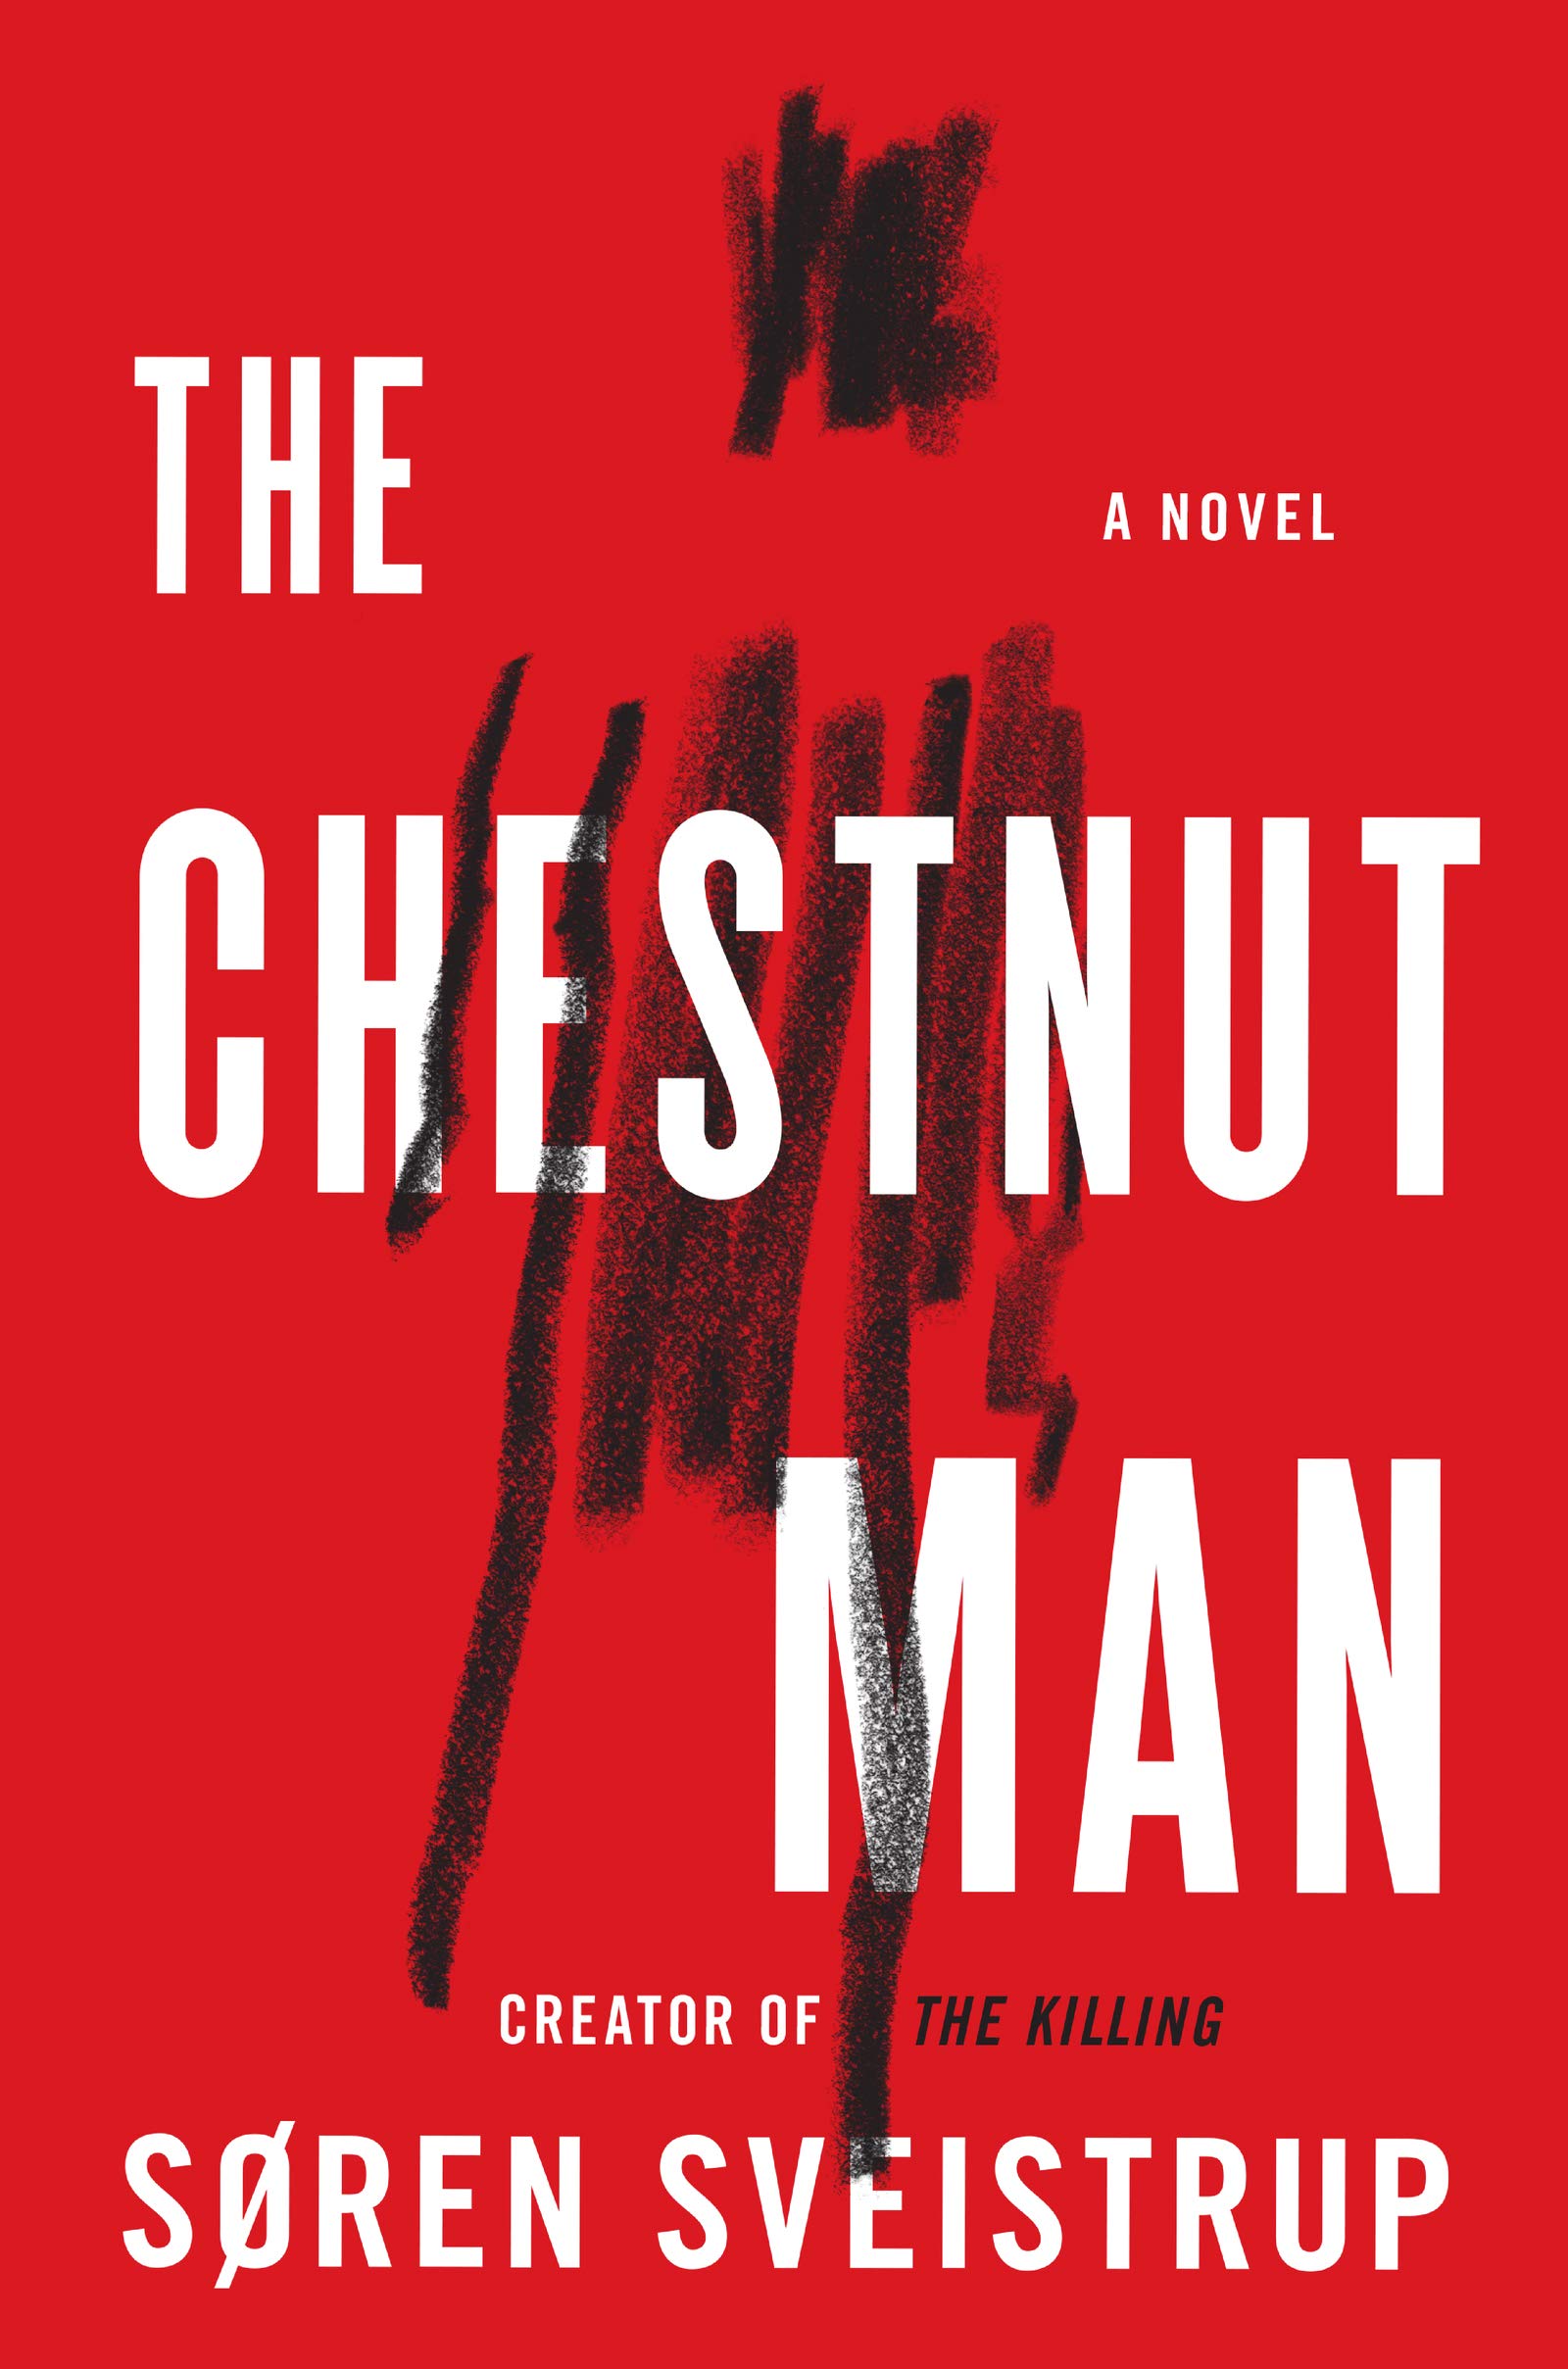 Image for "The Chestnut Man"